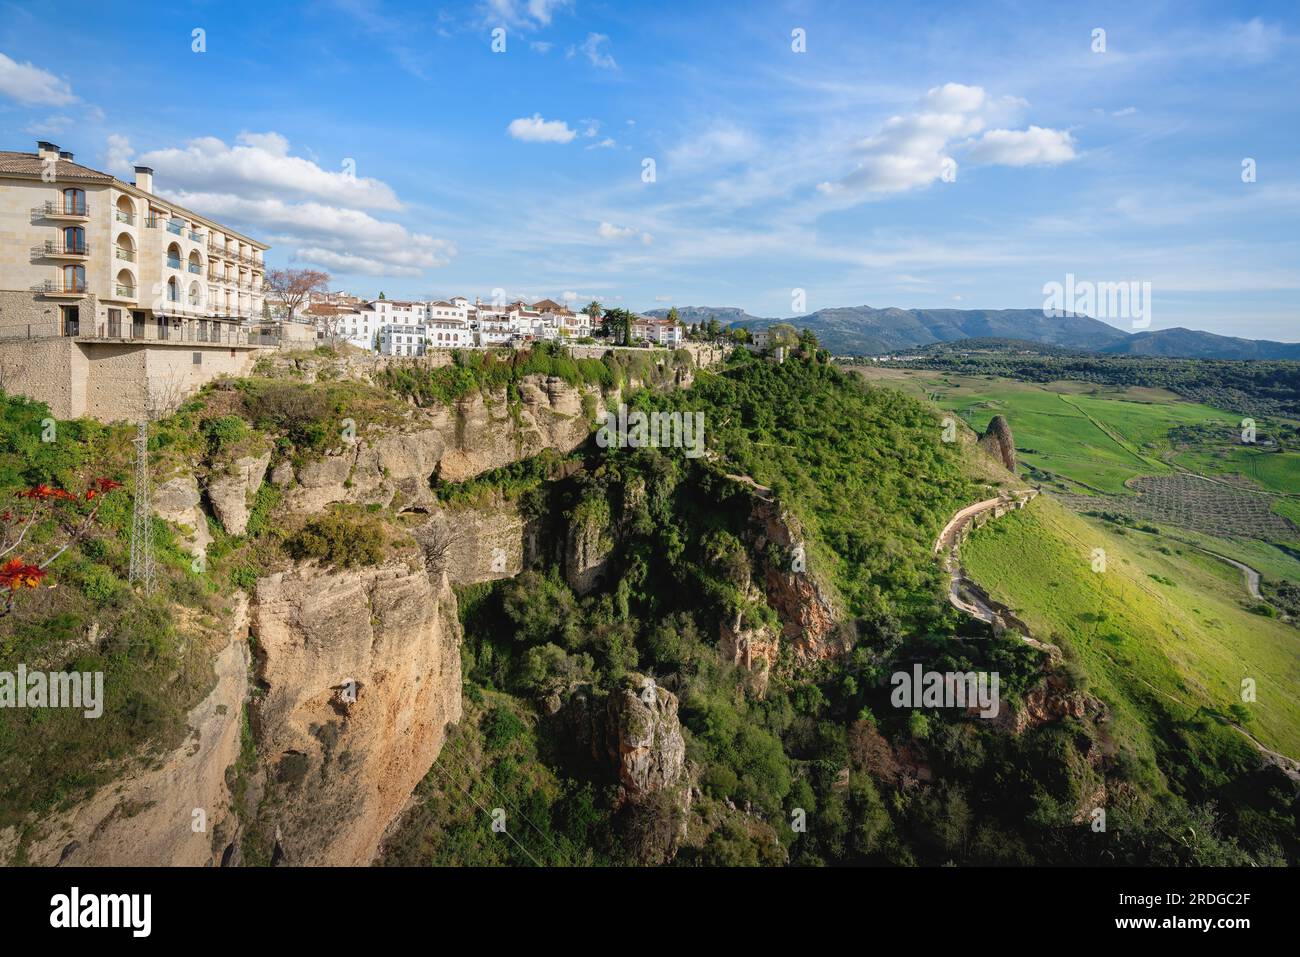 View of Ronda Buildings over the Cliff with Walls and Valley - Ronda, Andalusia, Spain Stock Photo